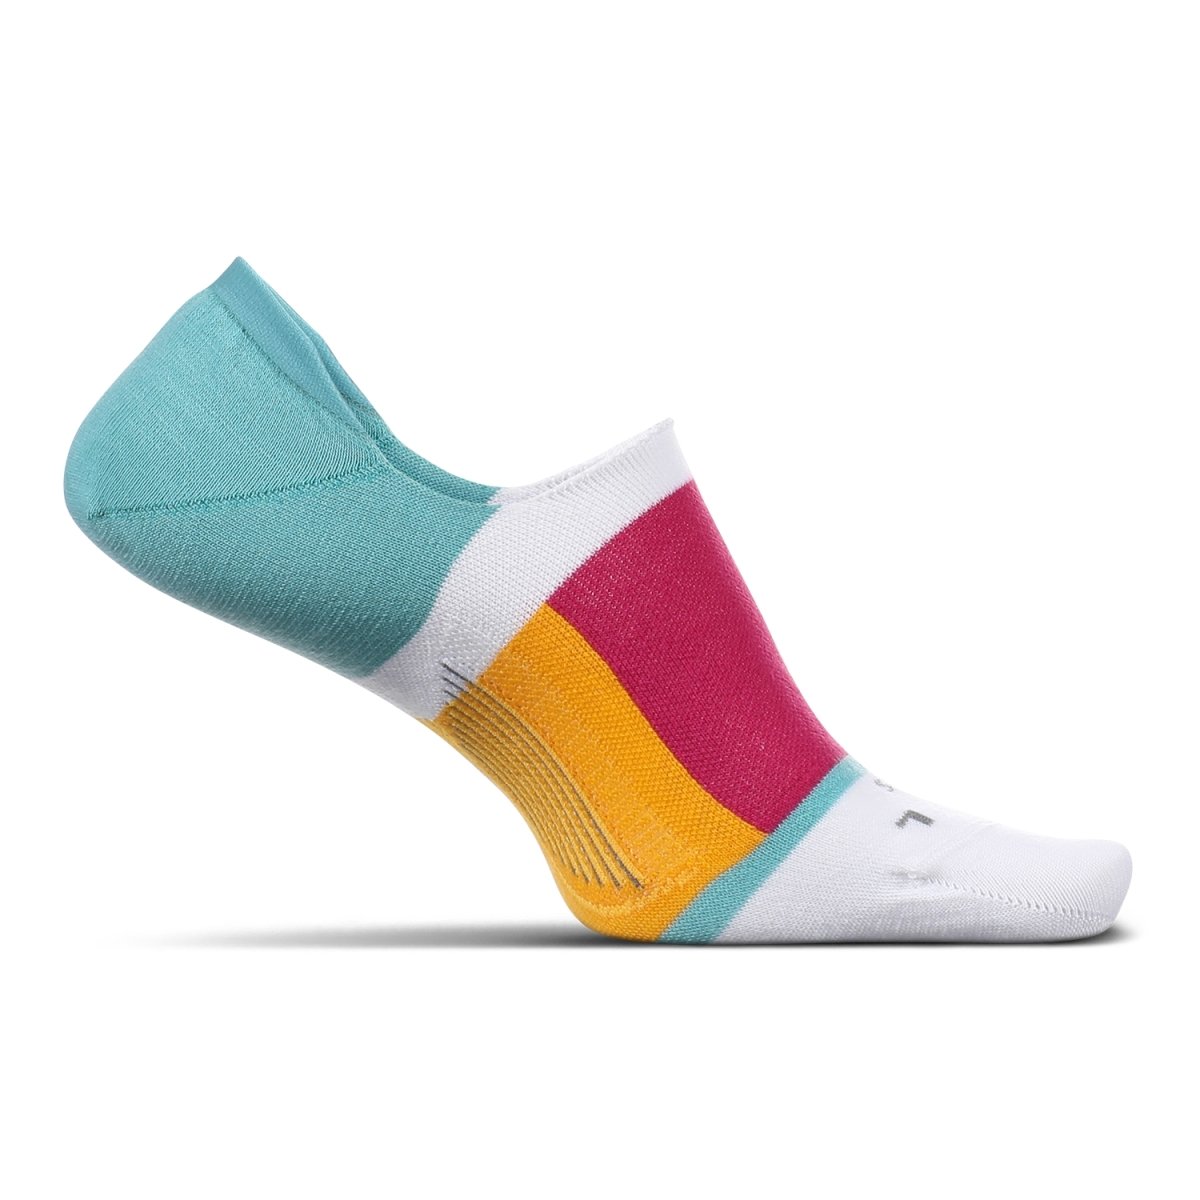 Feetures Everyday Women's Ultra Light No Show Socks - Palette Turquoise Tonic